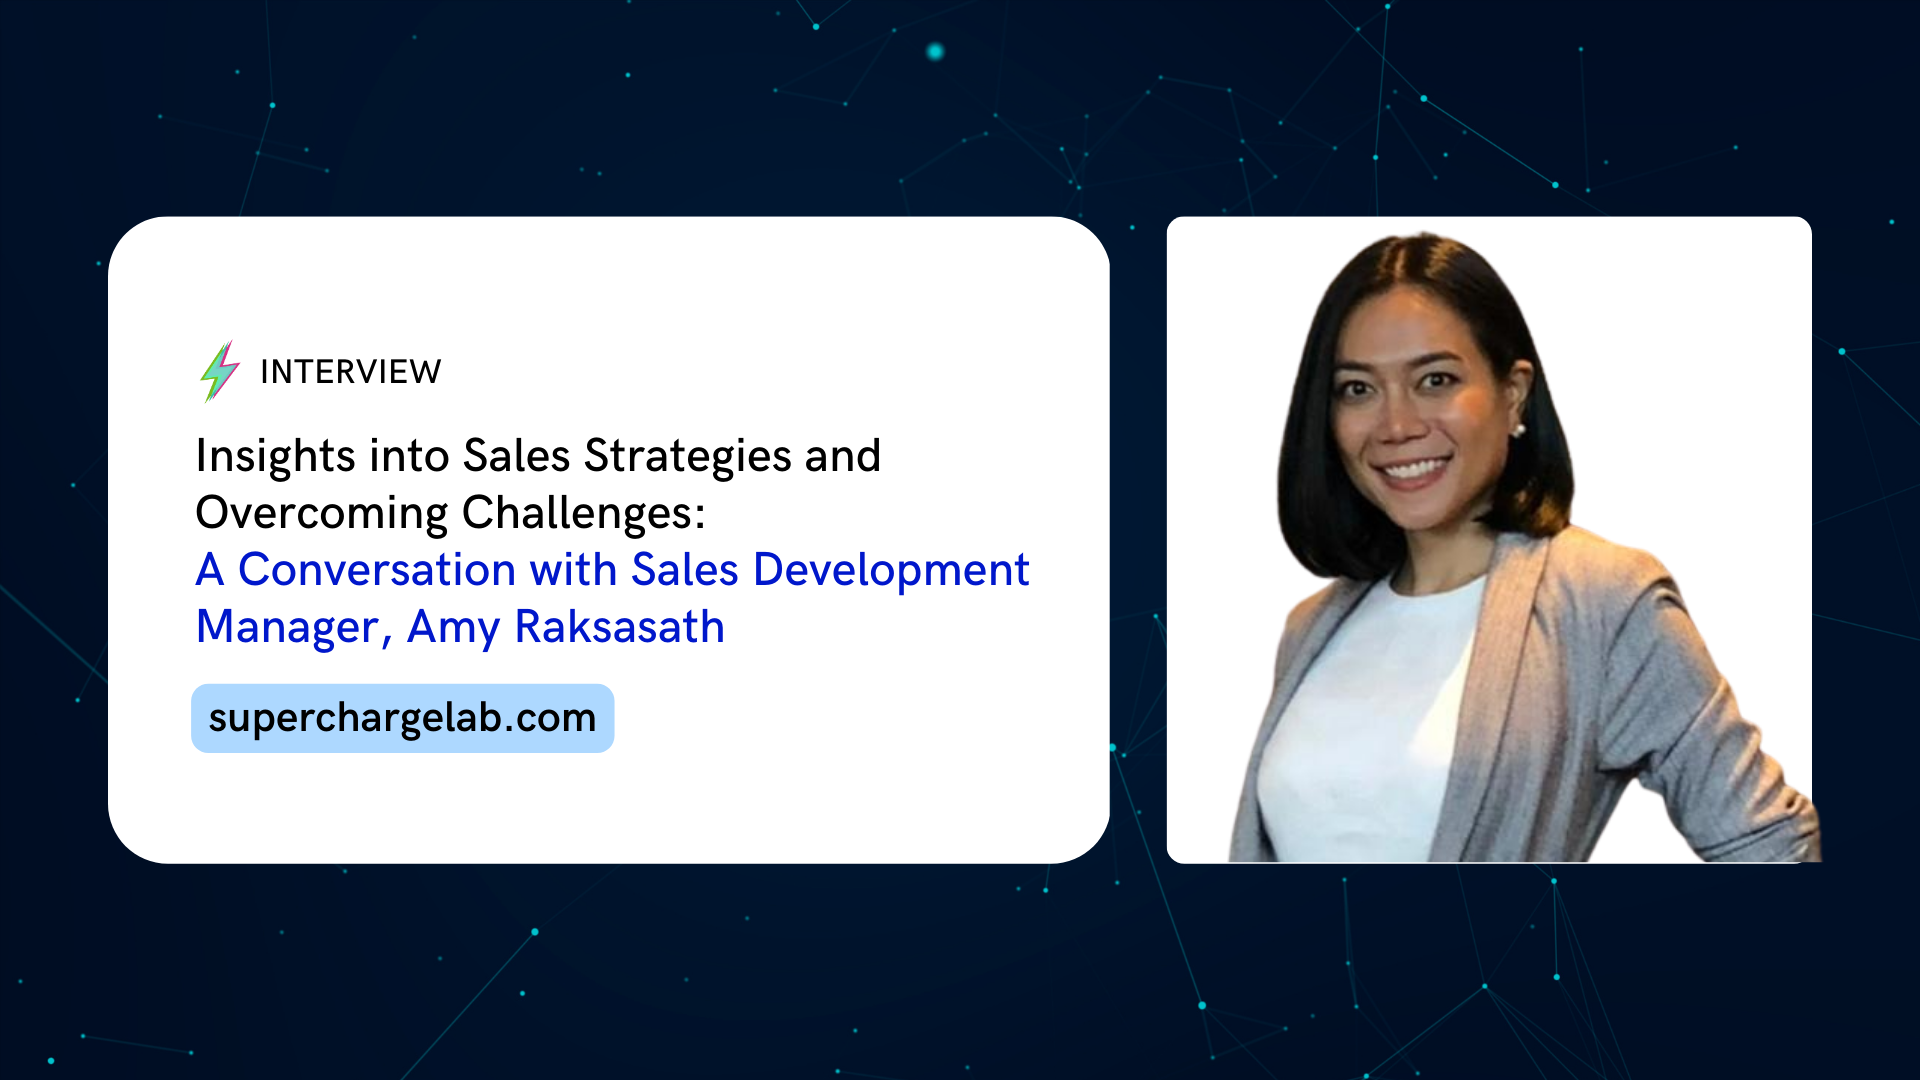 Insights into Sales Strategies and Overcoming Challenges: A Conversation with Sales Development Manager, Amy Raksasath